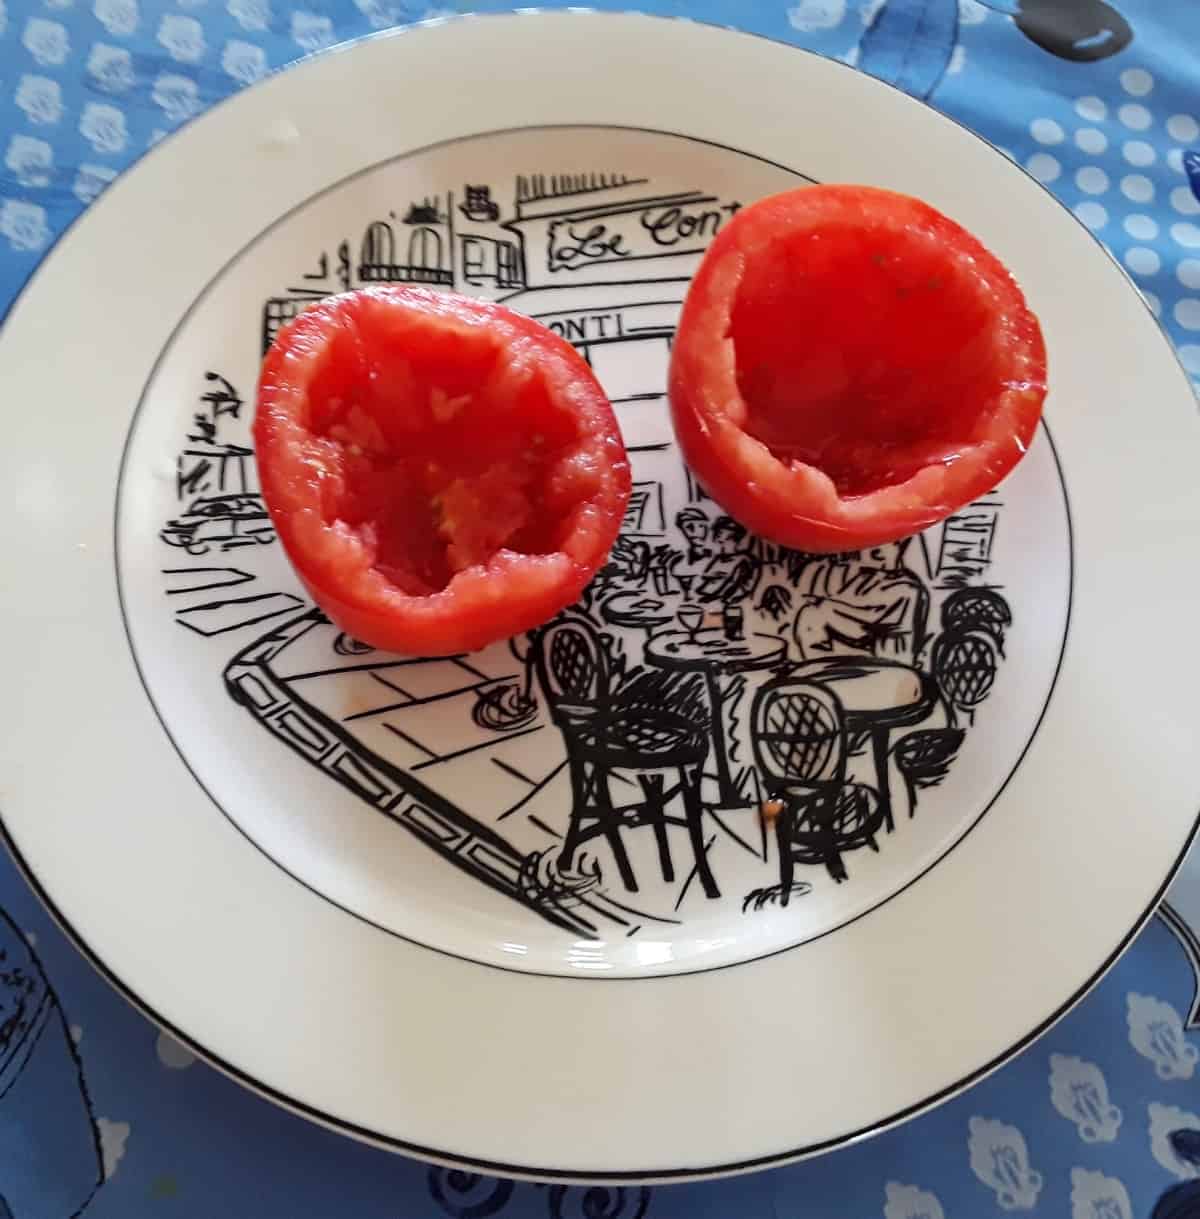 Roma tomato cut in halve and hollowed out on white plate.